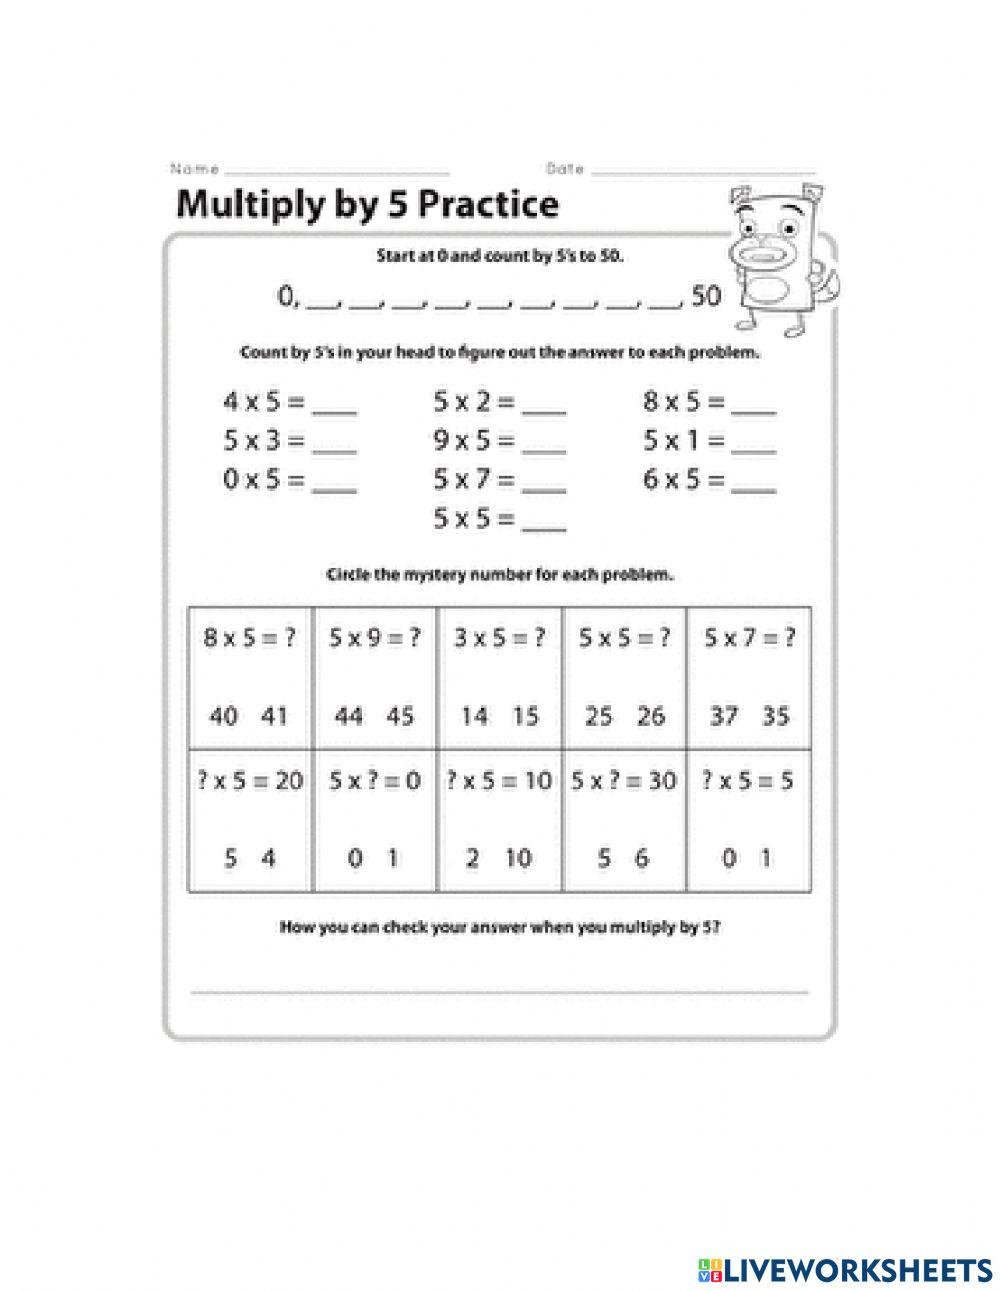 Multiplication by 5